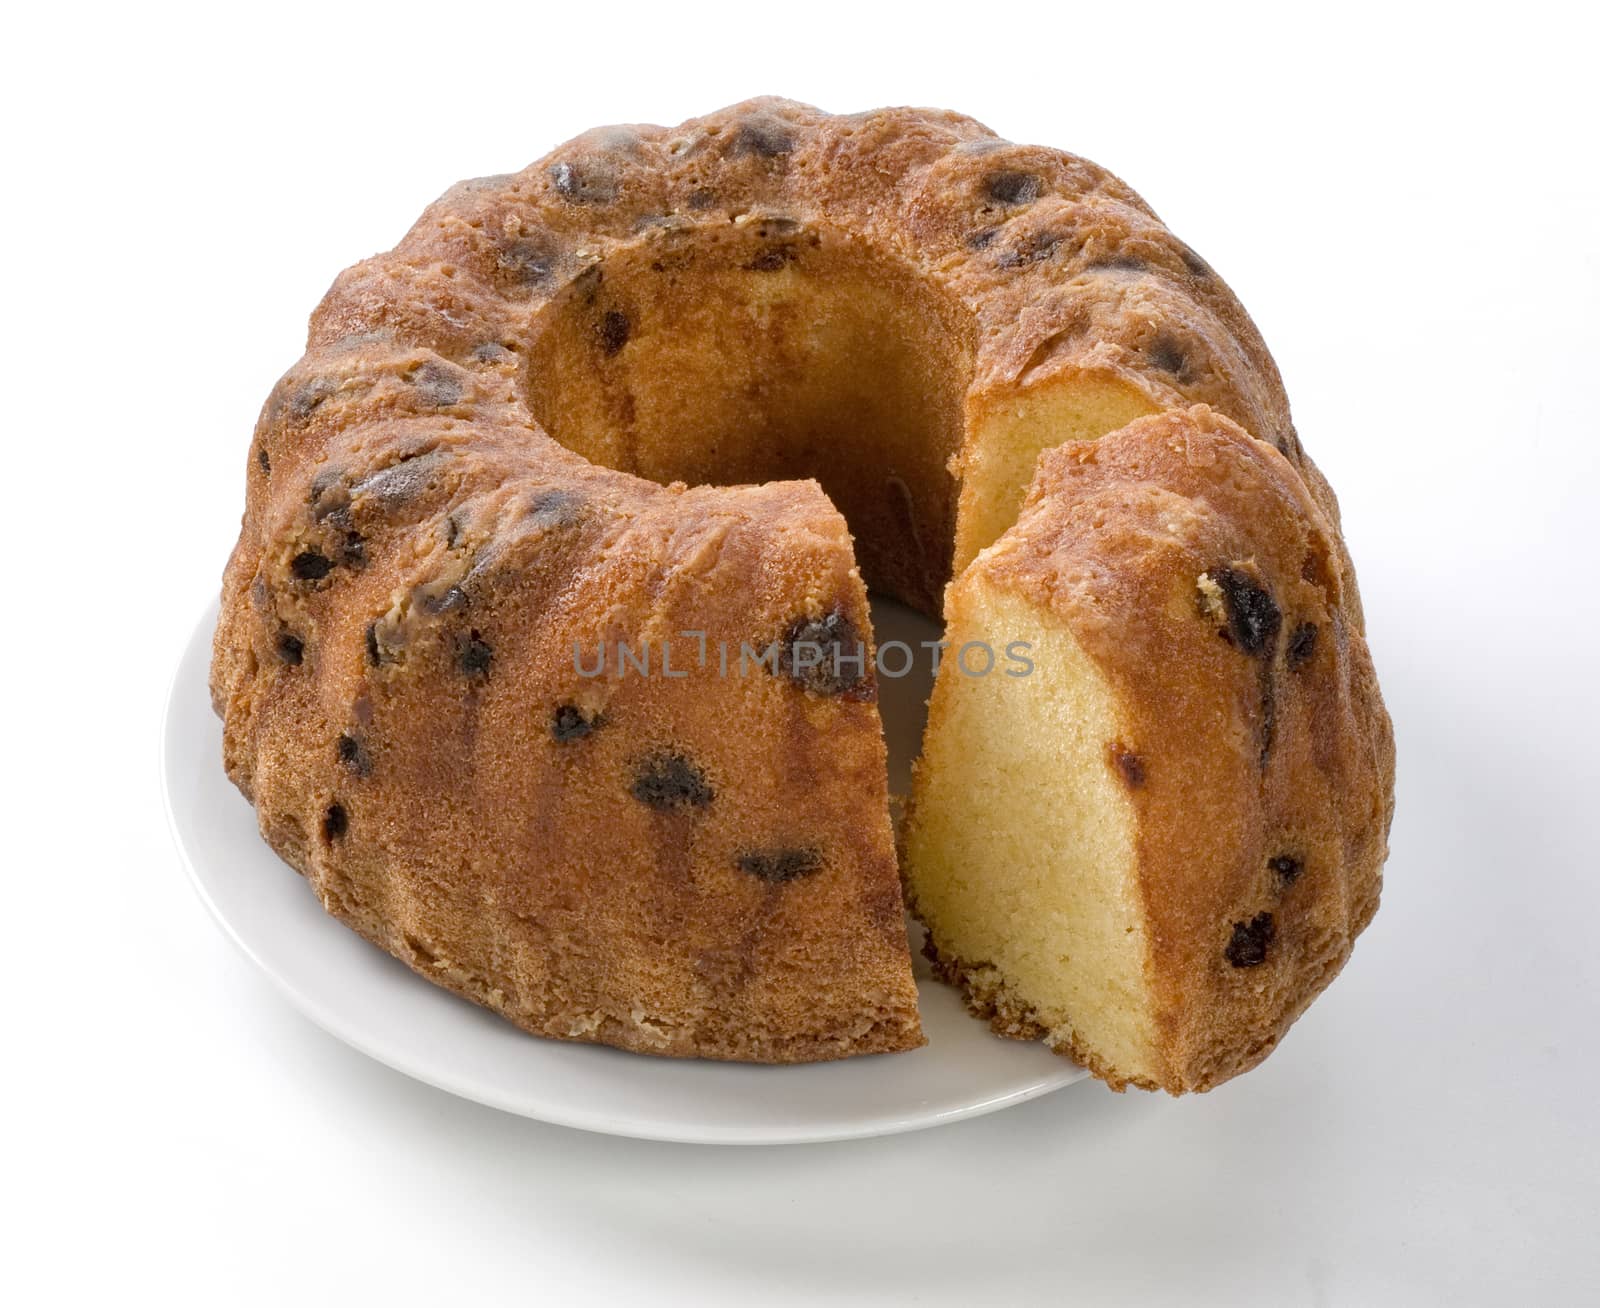 Sliced yellow Cake with raisins on a White Plate